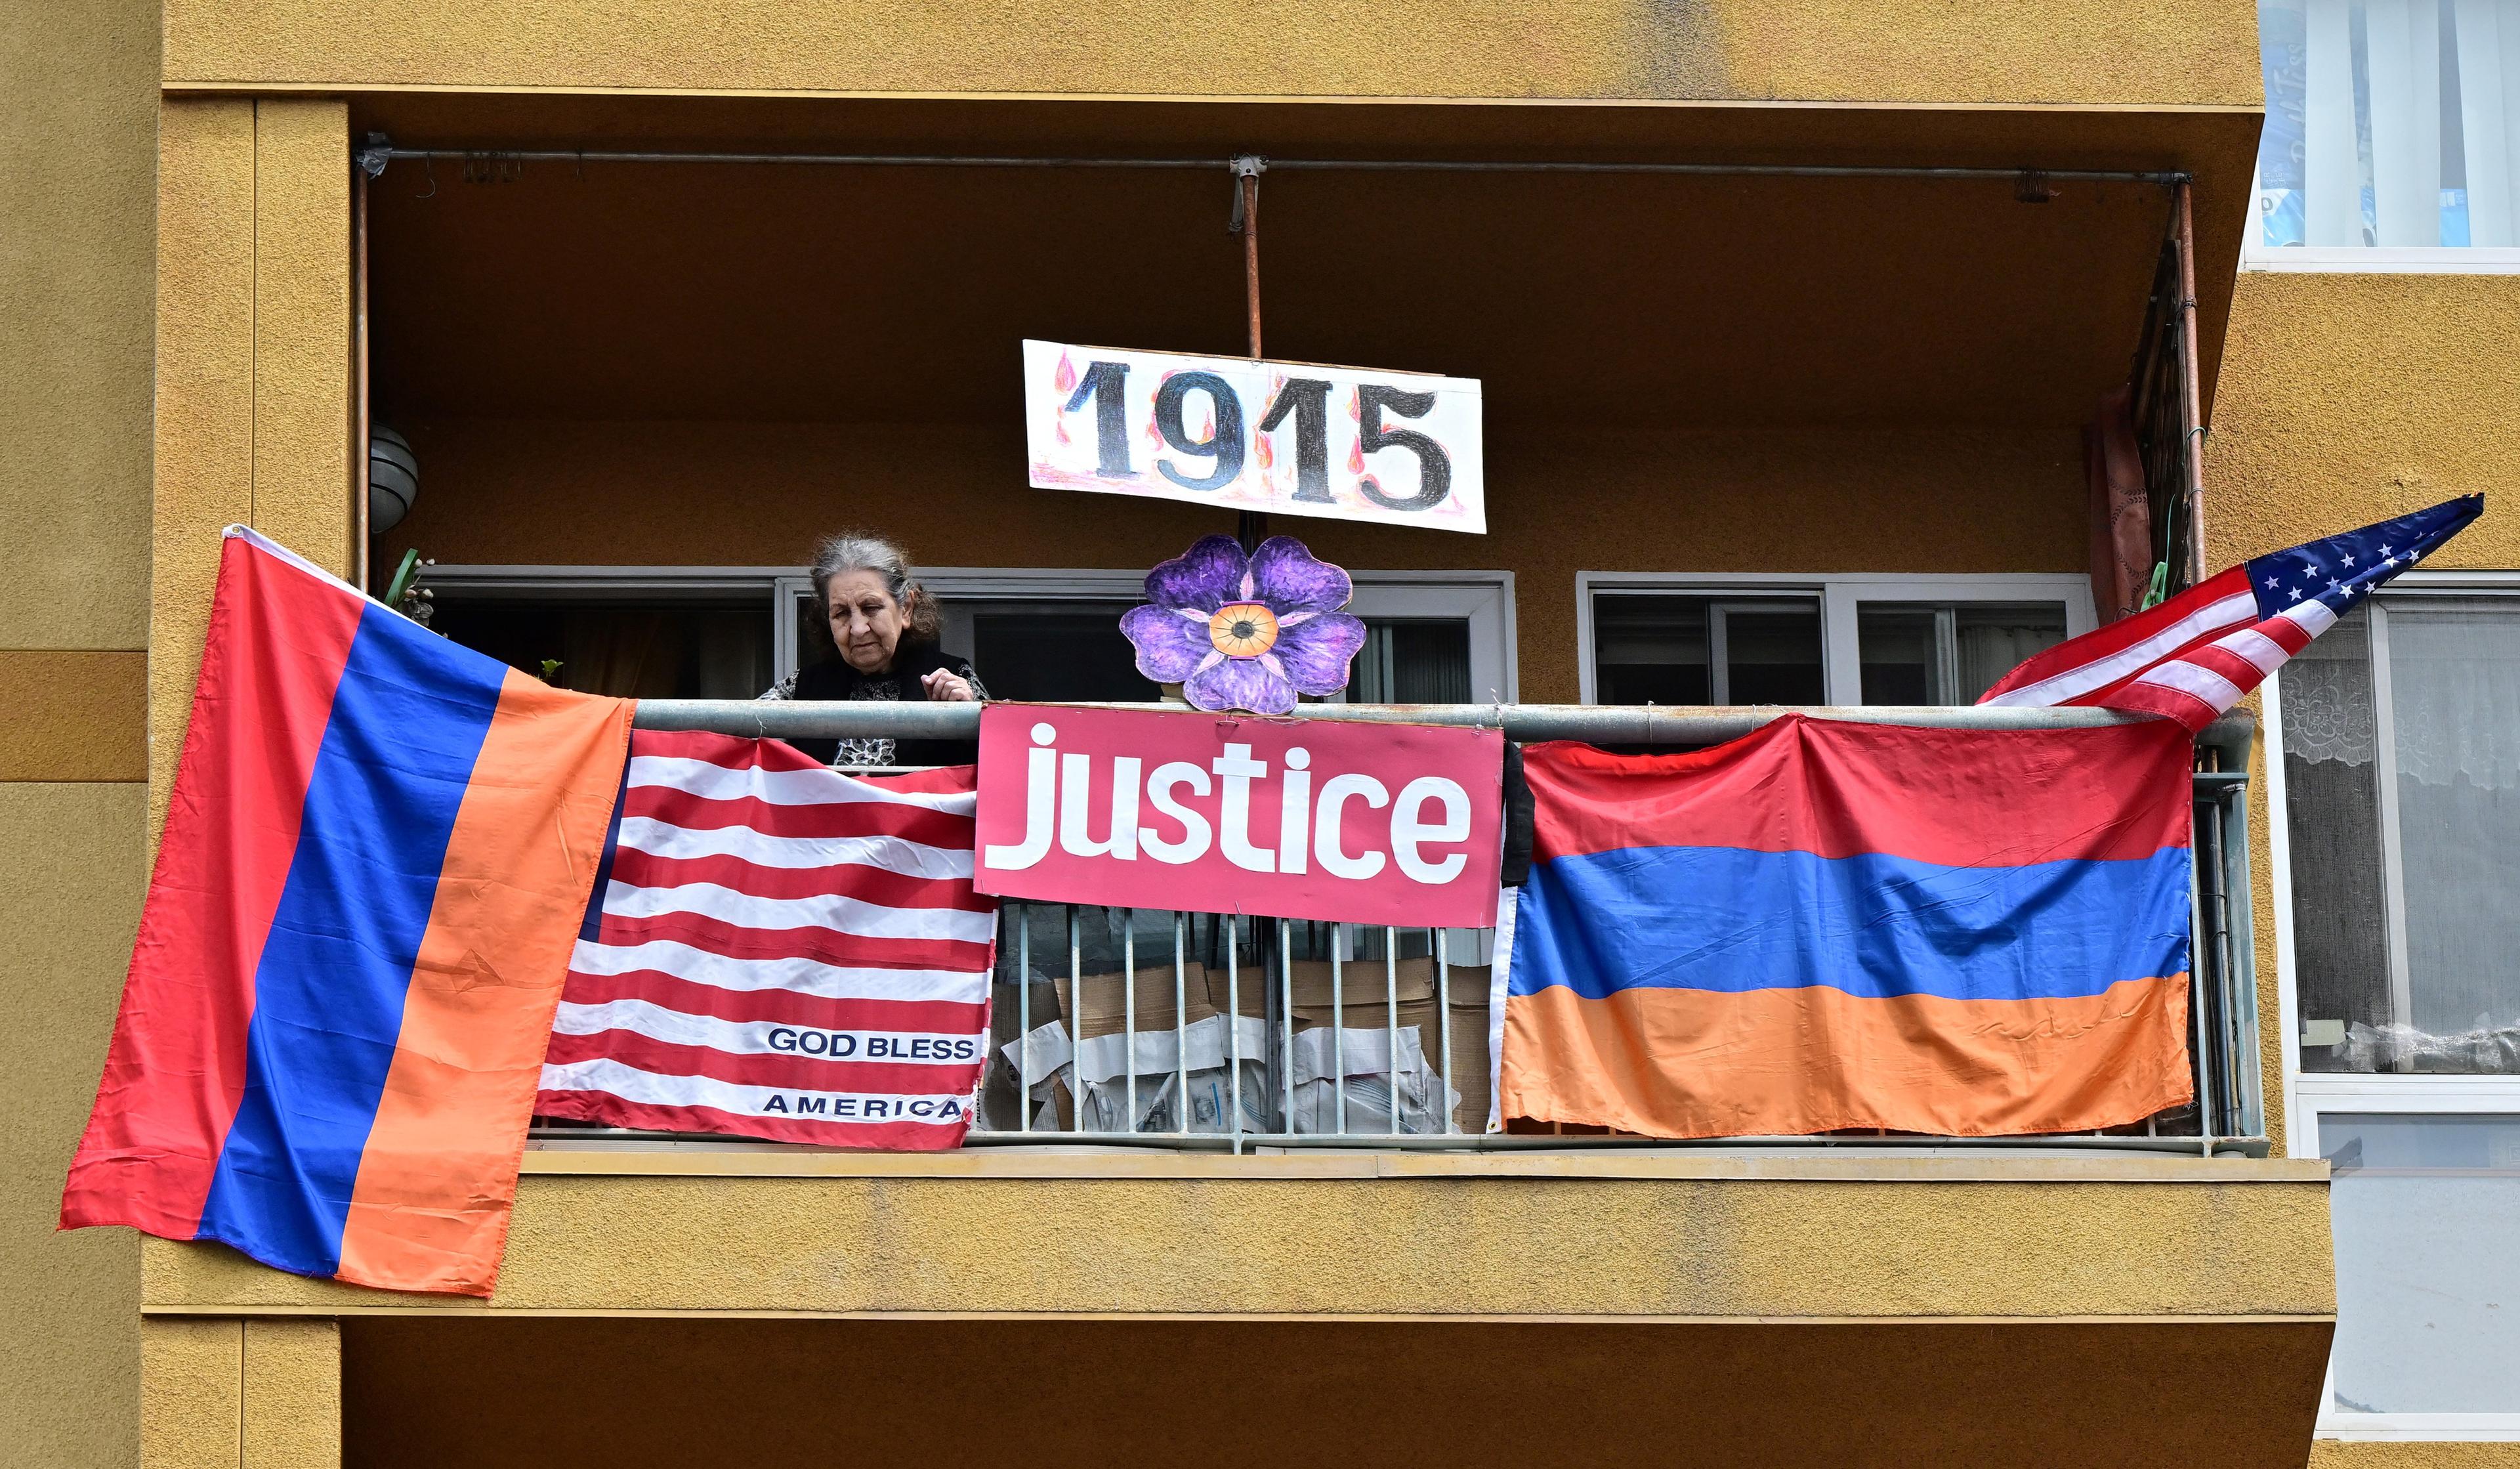 Los Angeles, Glendale Schools Closed for Armenian Genocide Remembrance Day